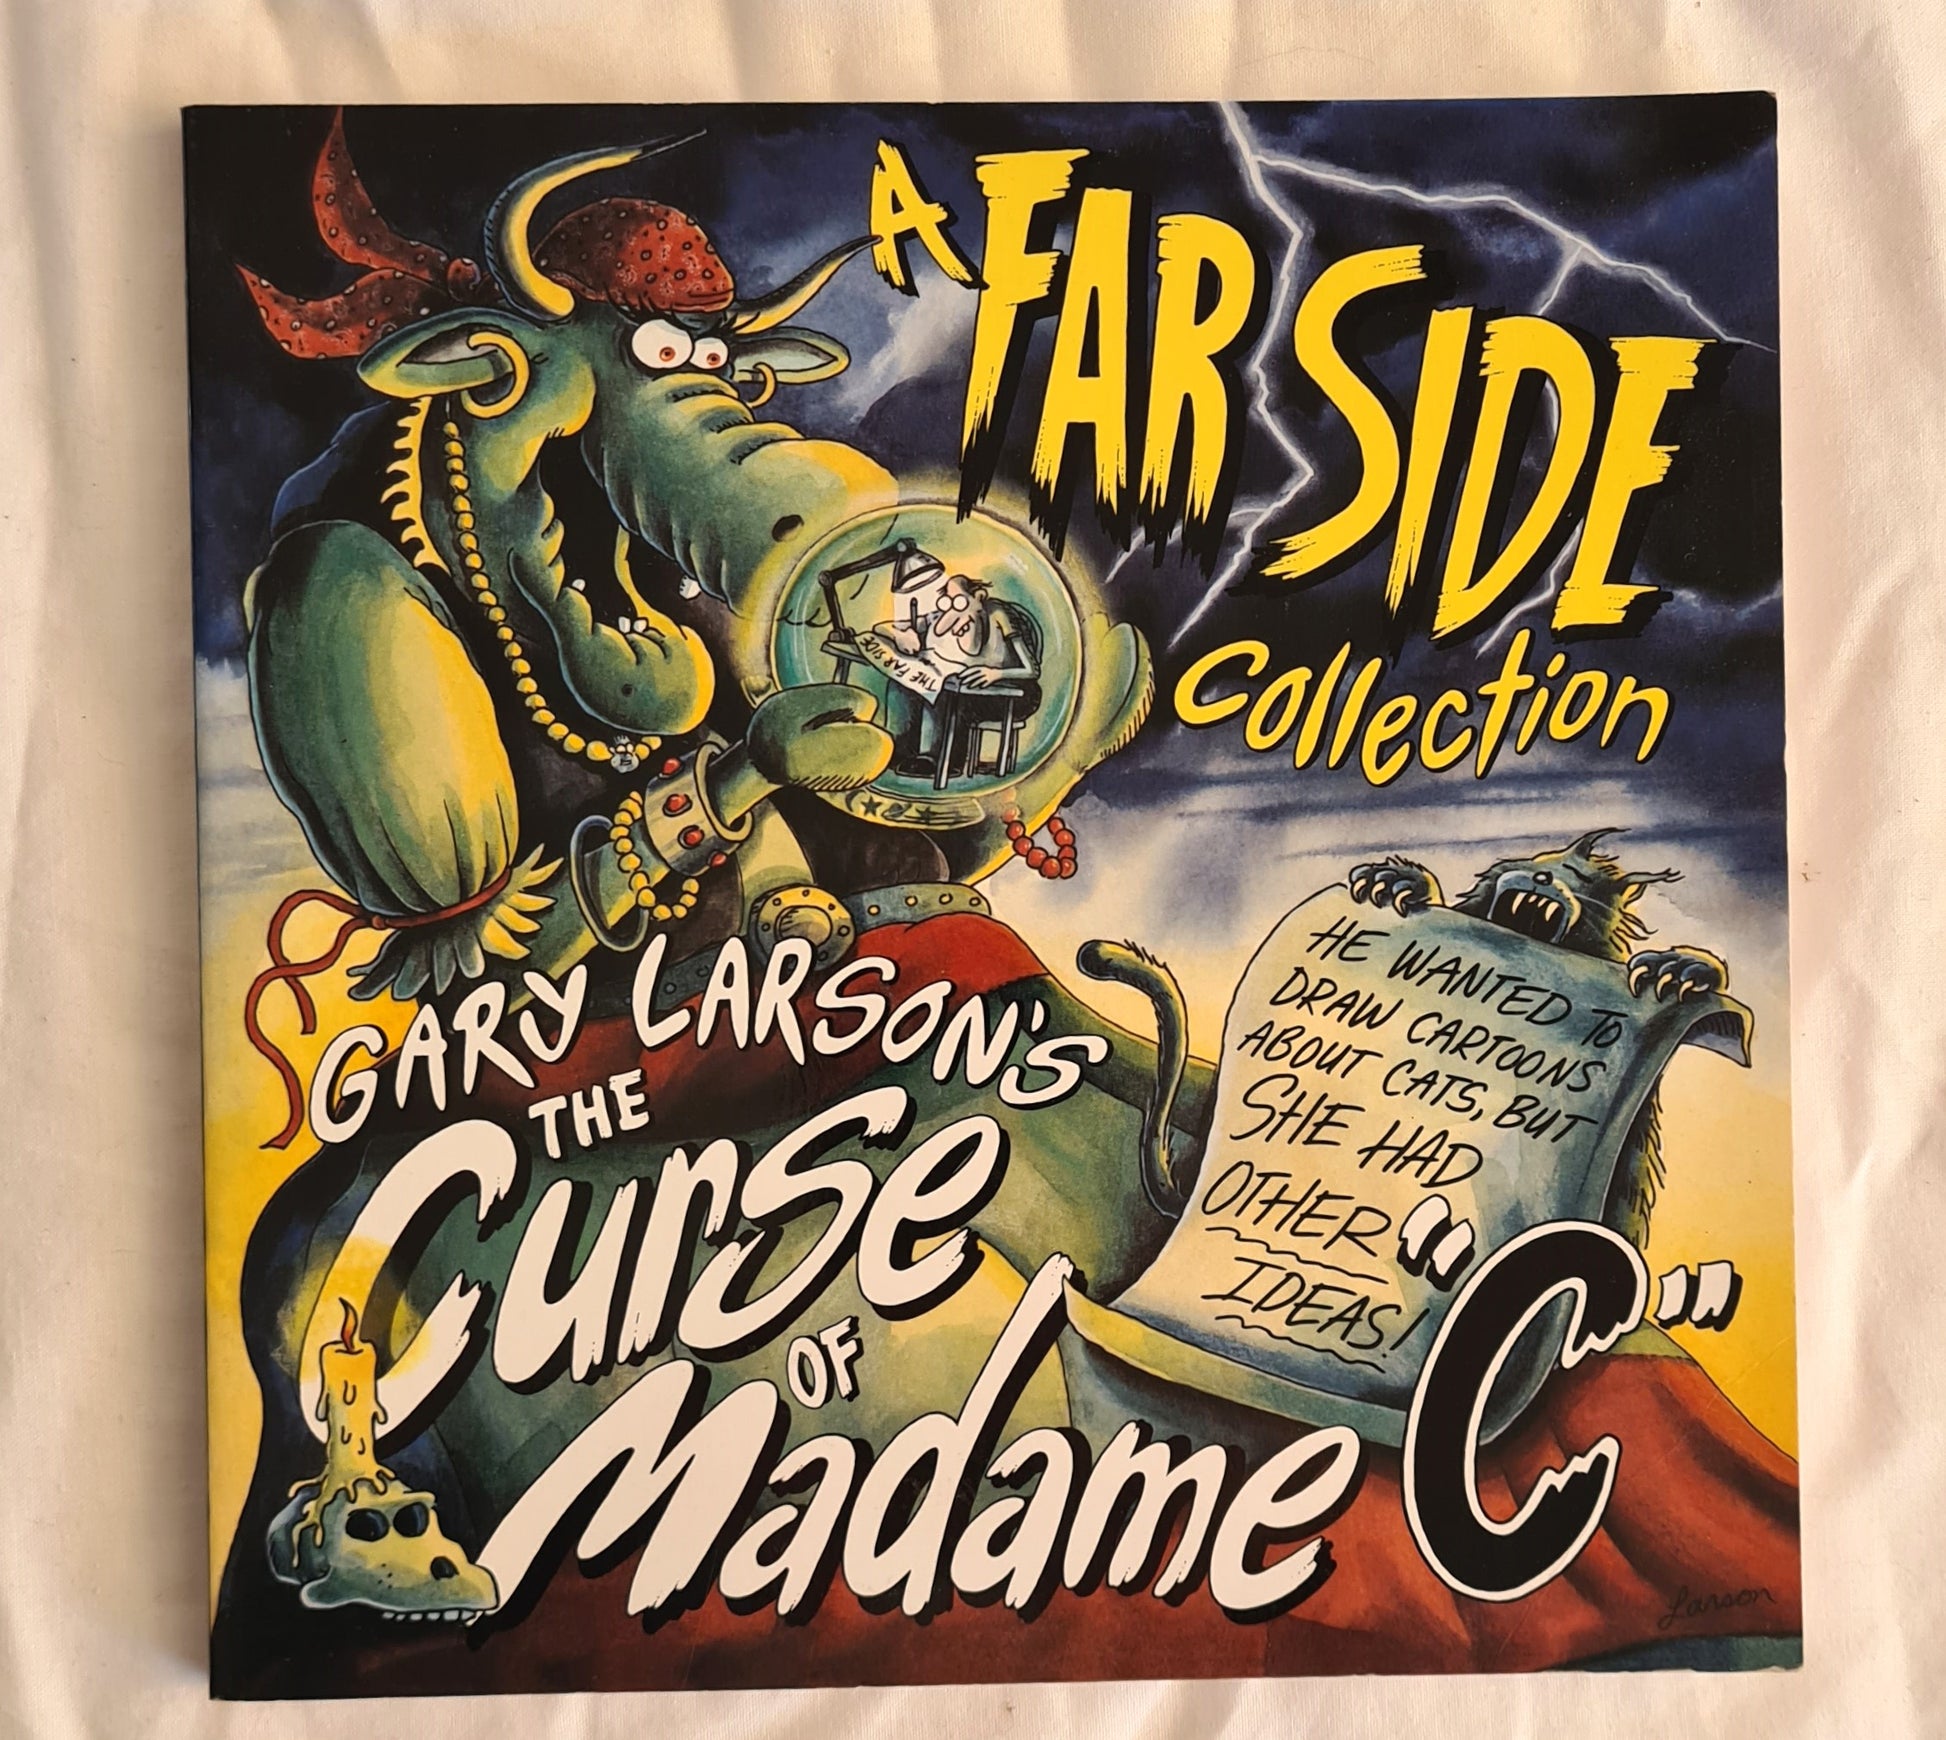 The Curse of Madame “C”  A Far Side Collection  by Gary Larson